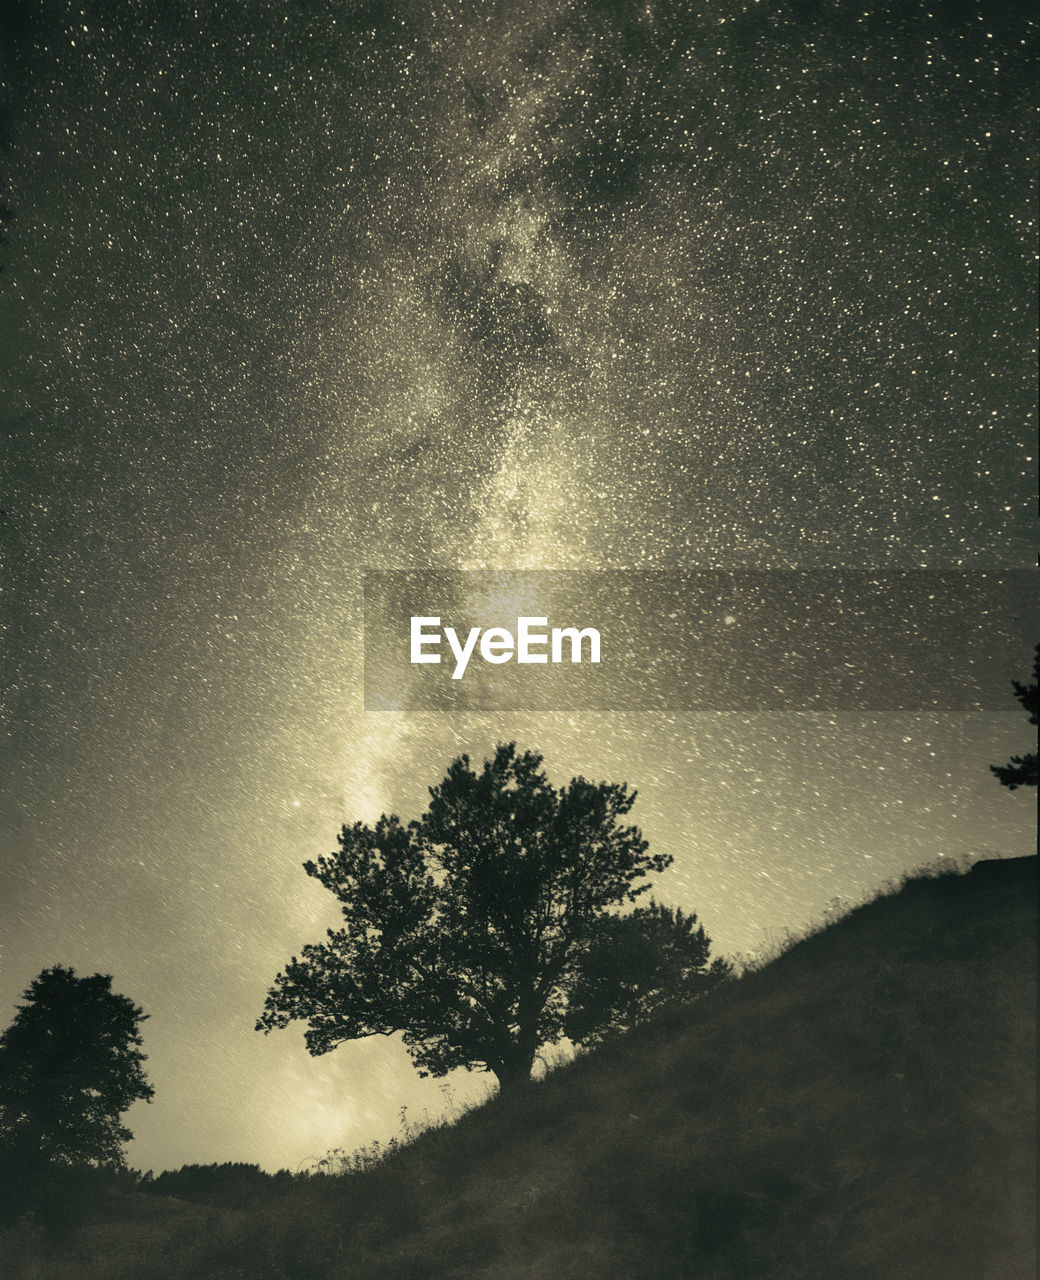 tree, sky, star, plant, astronomy, darkness, space, beauty in nature, scenics - nature, night, tranquility, nature, tranquil scene, astronomical object, star field, low angle view, silhouette, no people, galaxy, growth, idyllic, land, moonlight, landscape, non-urban scene, outdoors, space and astronomy, environment, science, cloud, light